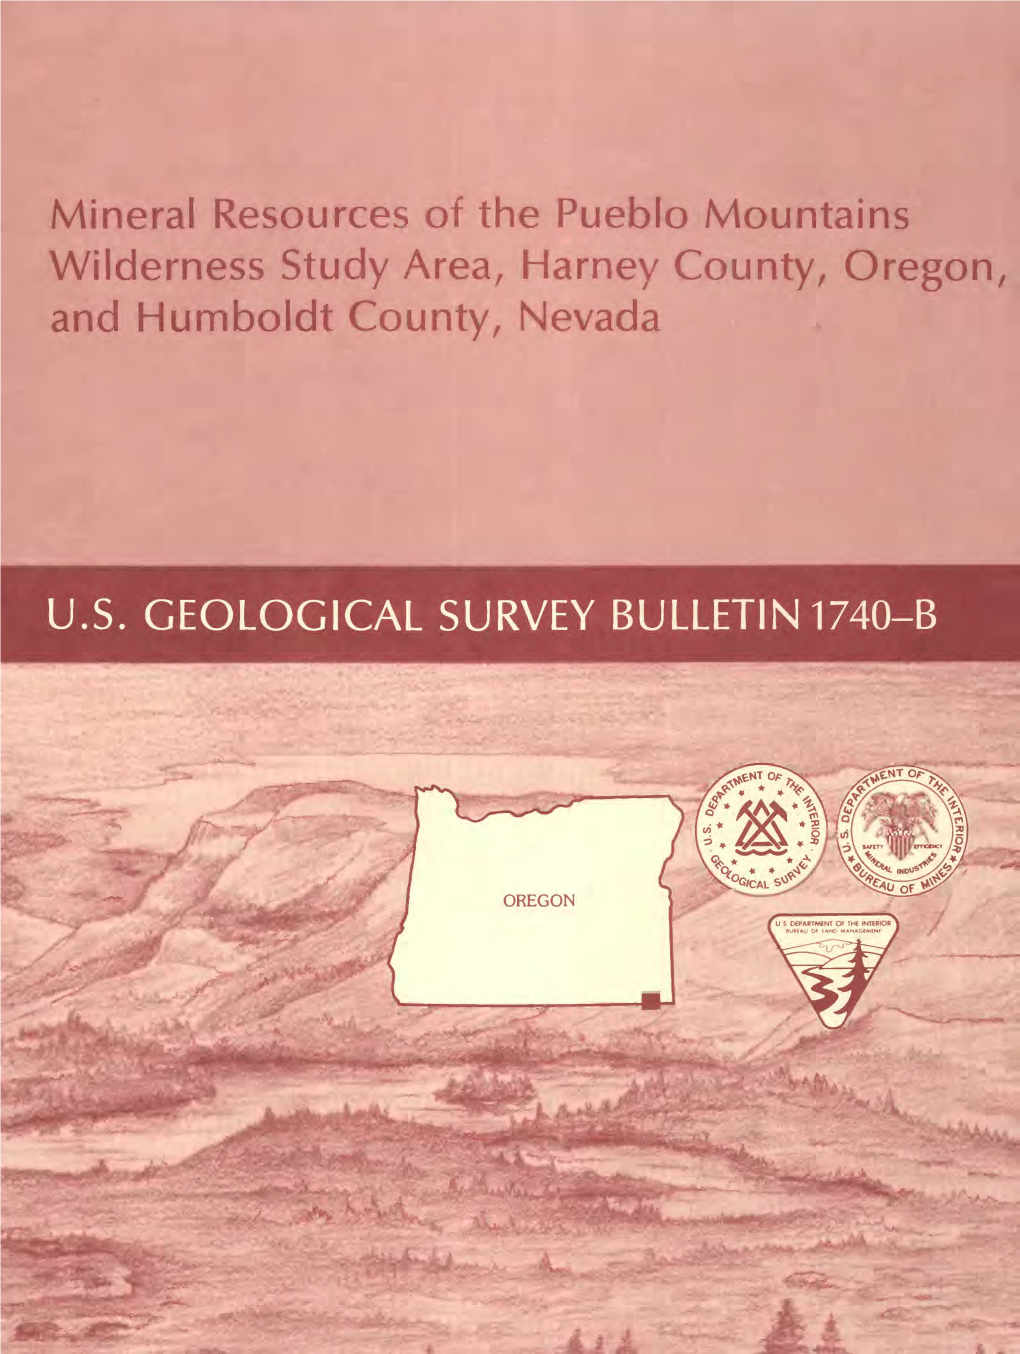 Mineral Resources of the Pueblo Mountains Wilderness Study Area, Harney County, Oregon, and Humboldt County, Nevada